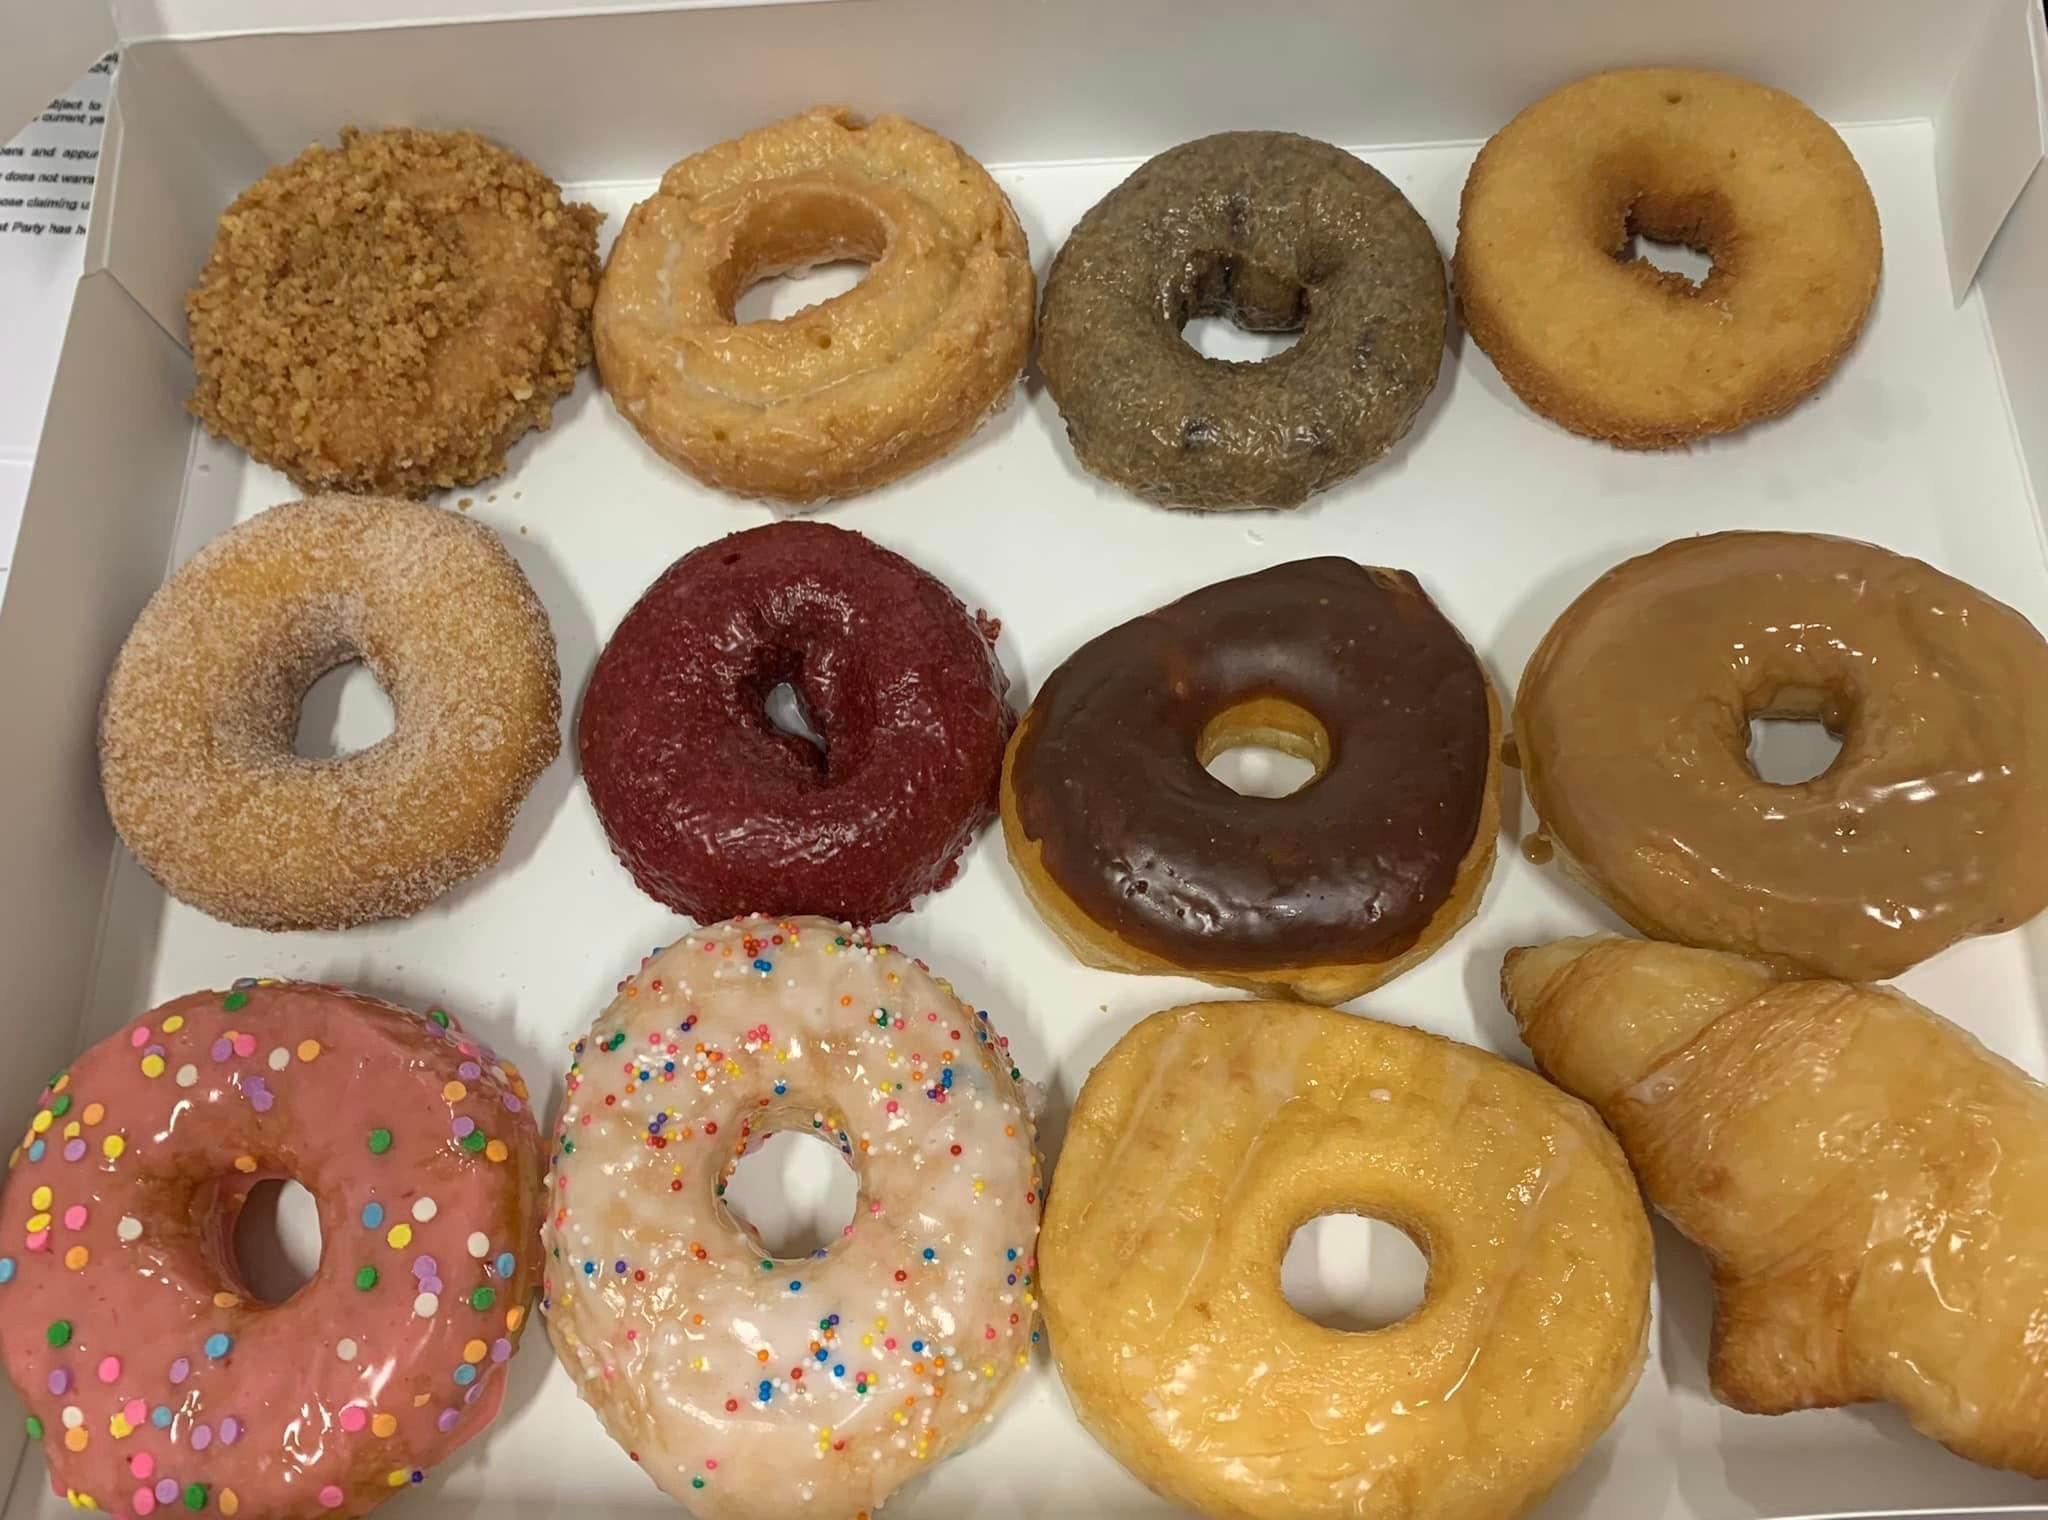 Thank you to Thomaston Hospice for surprising our office with this delicious treat today!! Have you ever eaten a donut that’s so good that you just have to dance? We promise these will make you do a donut dance